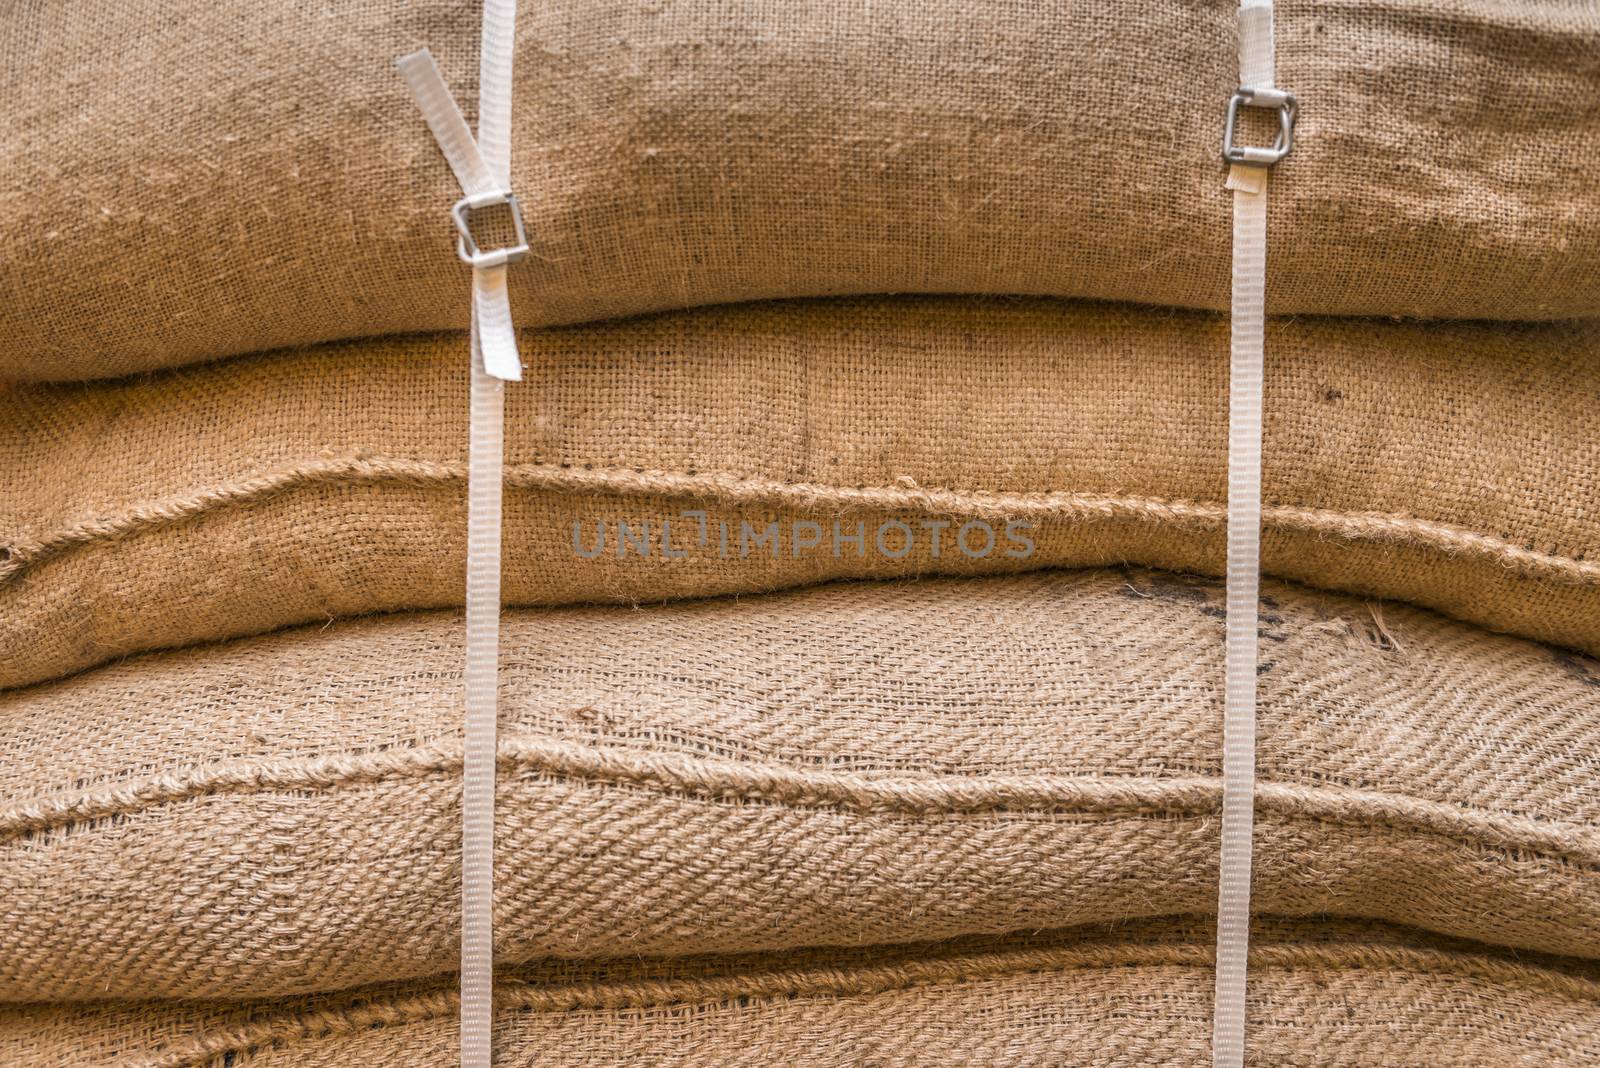 Close-up image of jute sacks filled with goods, piled upon each other and tied up, ready for transportation.